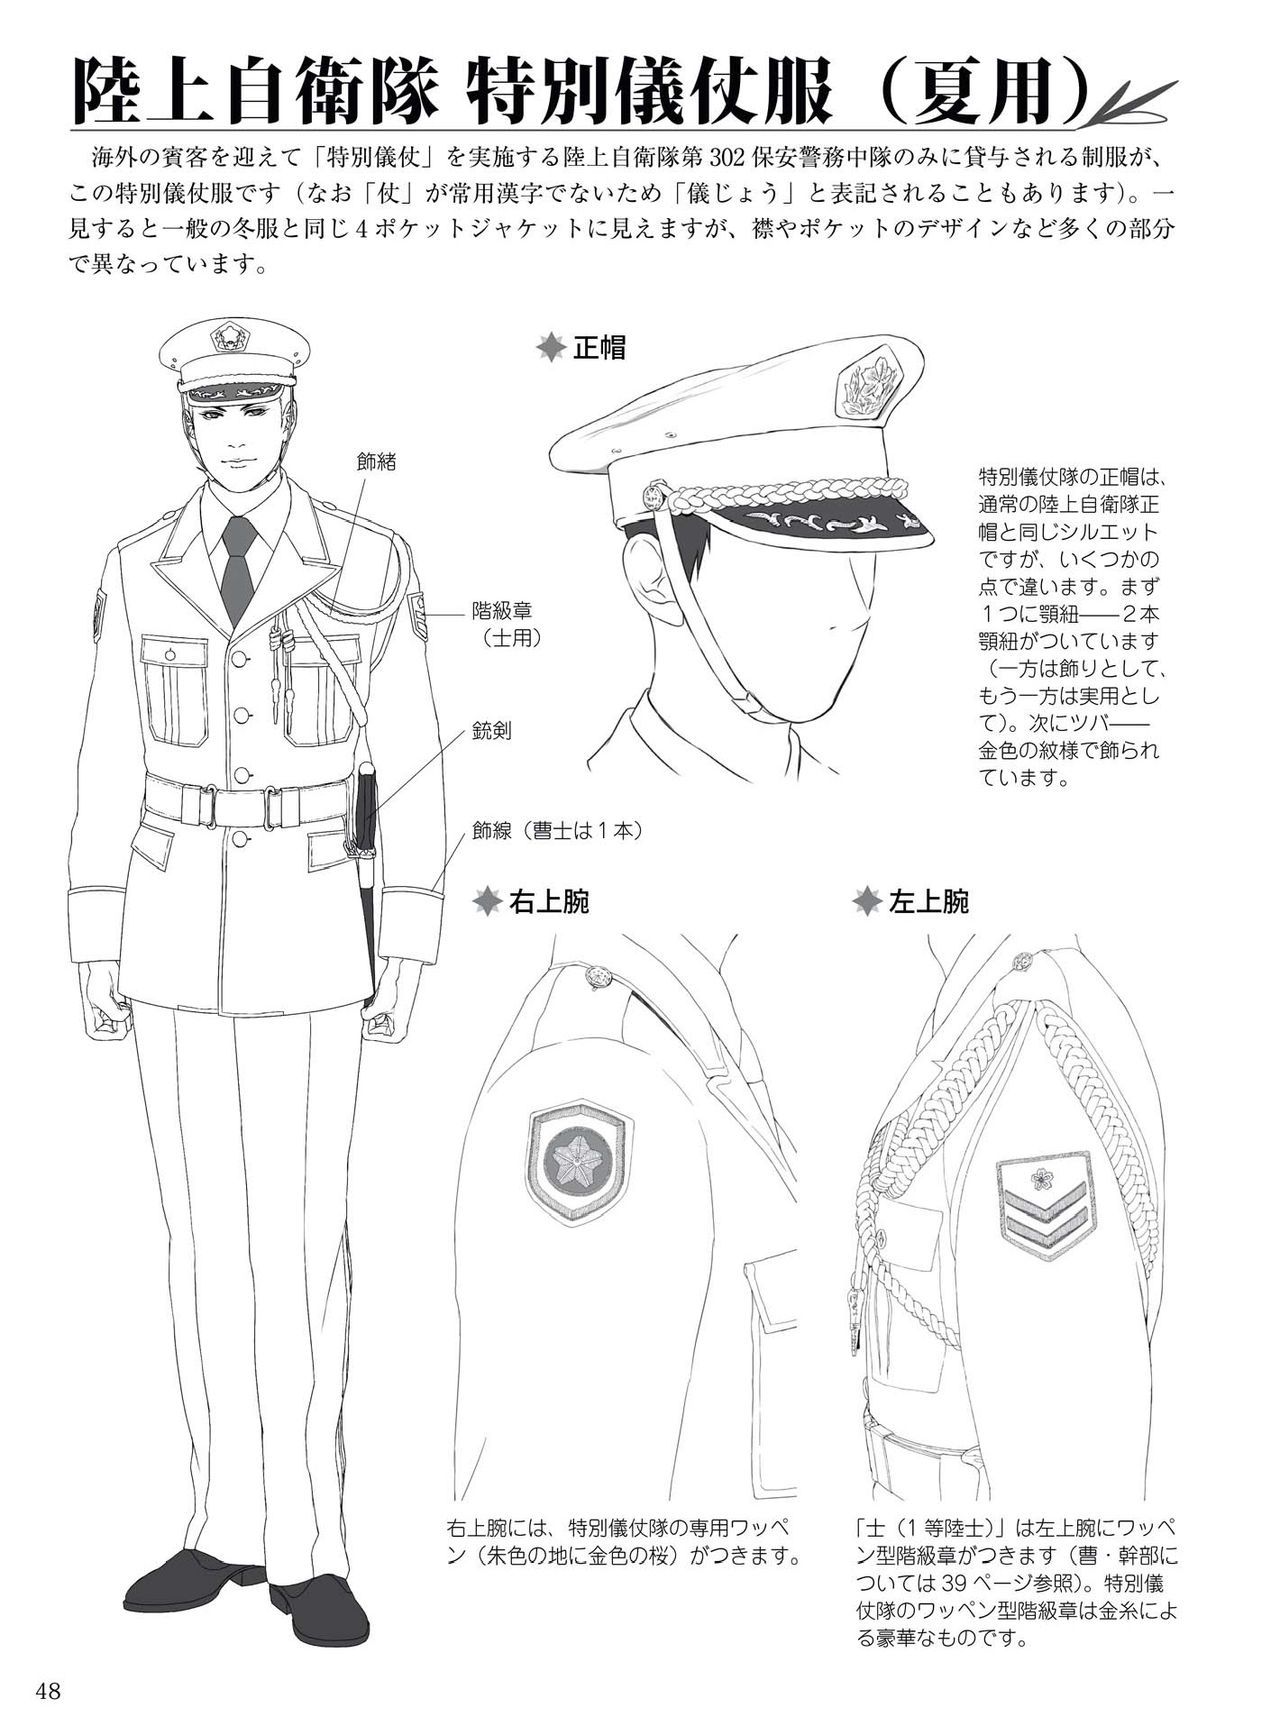 How to draw military uniforms and uniforms From Self-Defense Forces 軍服・制服の描き方 アメリカ軍・自衛隊の制服から戦闘服まで 51